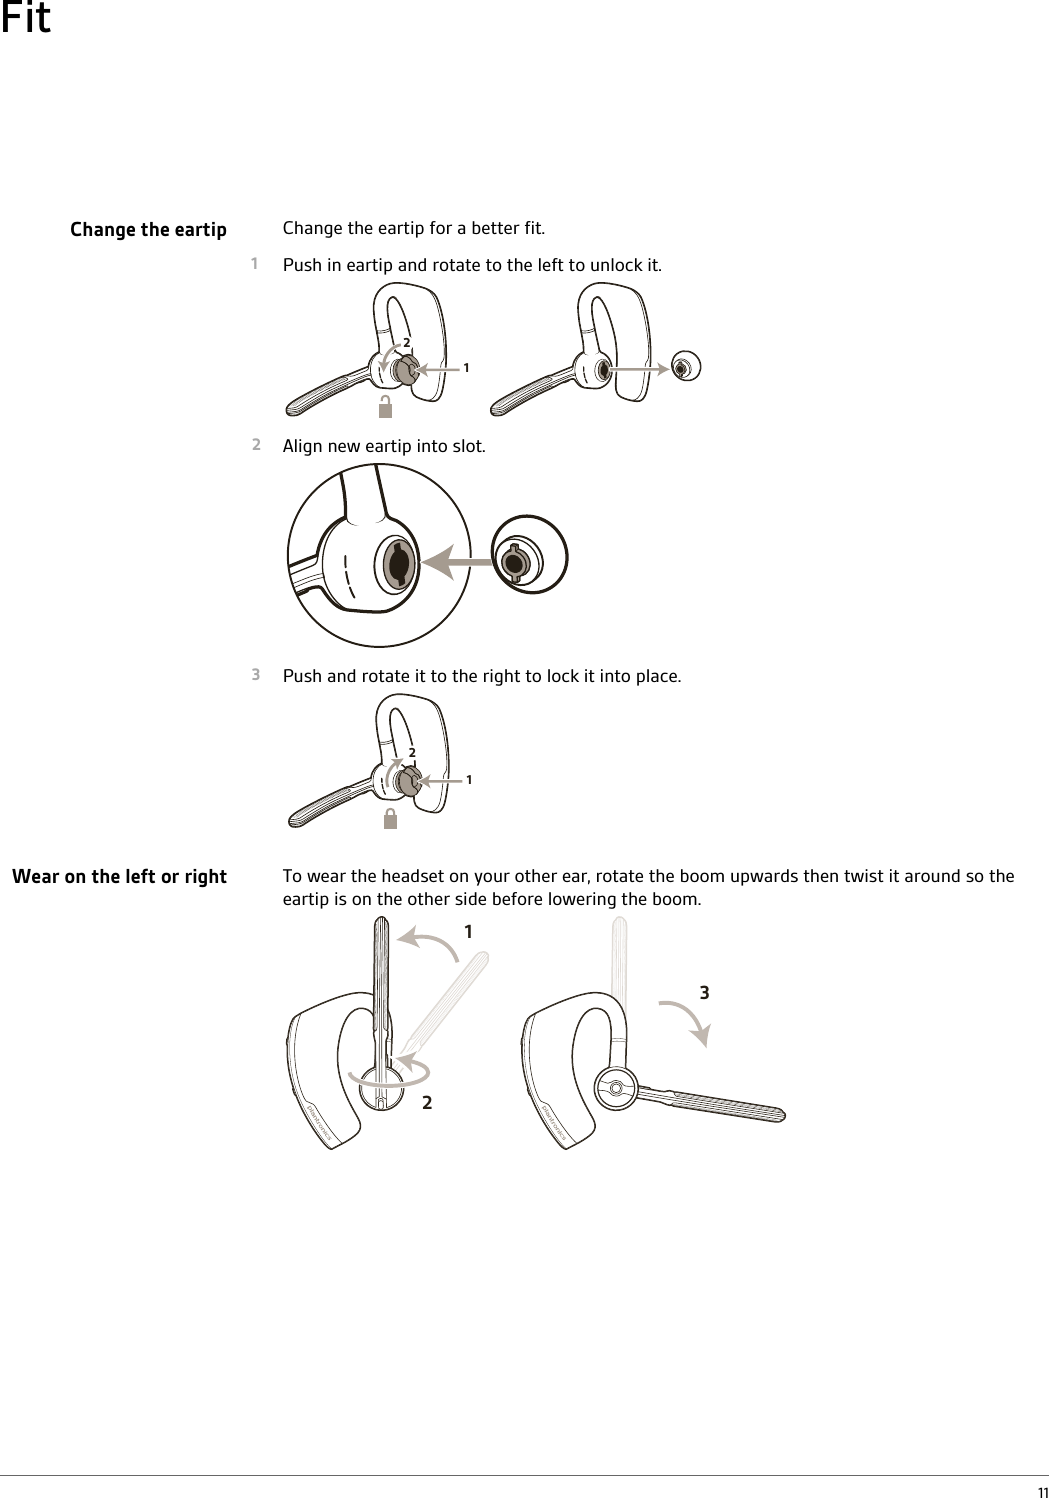 Change the eartip for a better fit.1Push in eartip and rotate to the left to unlock it.1222Align new eartip into slot.3Push and rotate it to the right to lock it into place.122To wear the headset on your other ear, rotate the boom upwards then twist it around so theeartip is on the other side before lowering the boom.213FitChange the eartipWear on the left or right11